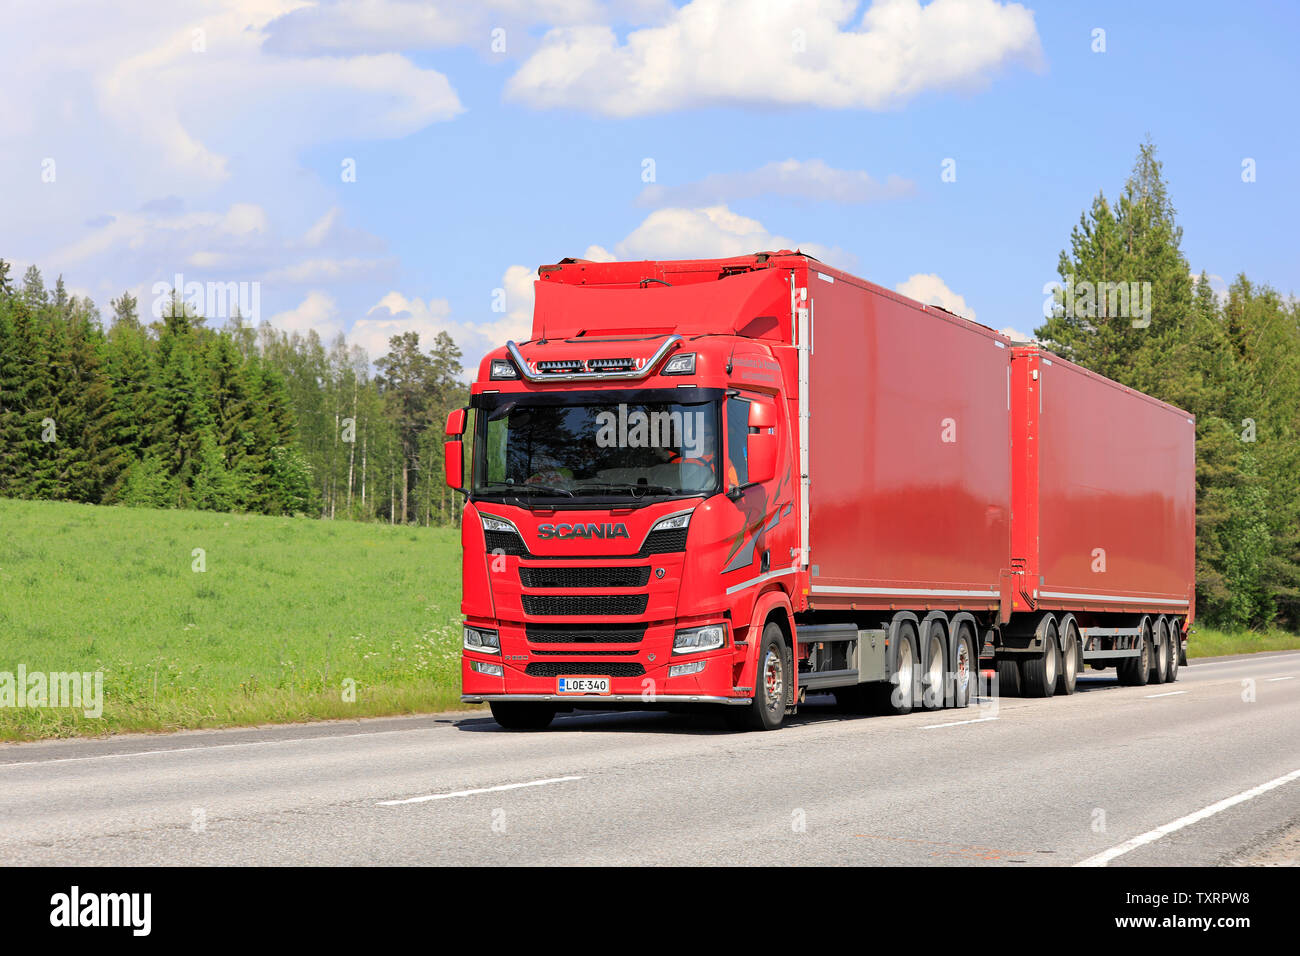 Jyvaskyla, Finland. June 8, 2019. New red Scania R650 truck with full trailer of Konnekuljetus Oy hauls goods along highway on a sunny day of summer. Stock Photo